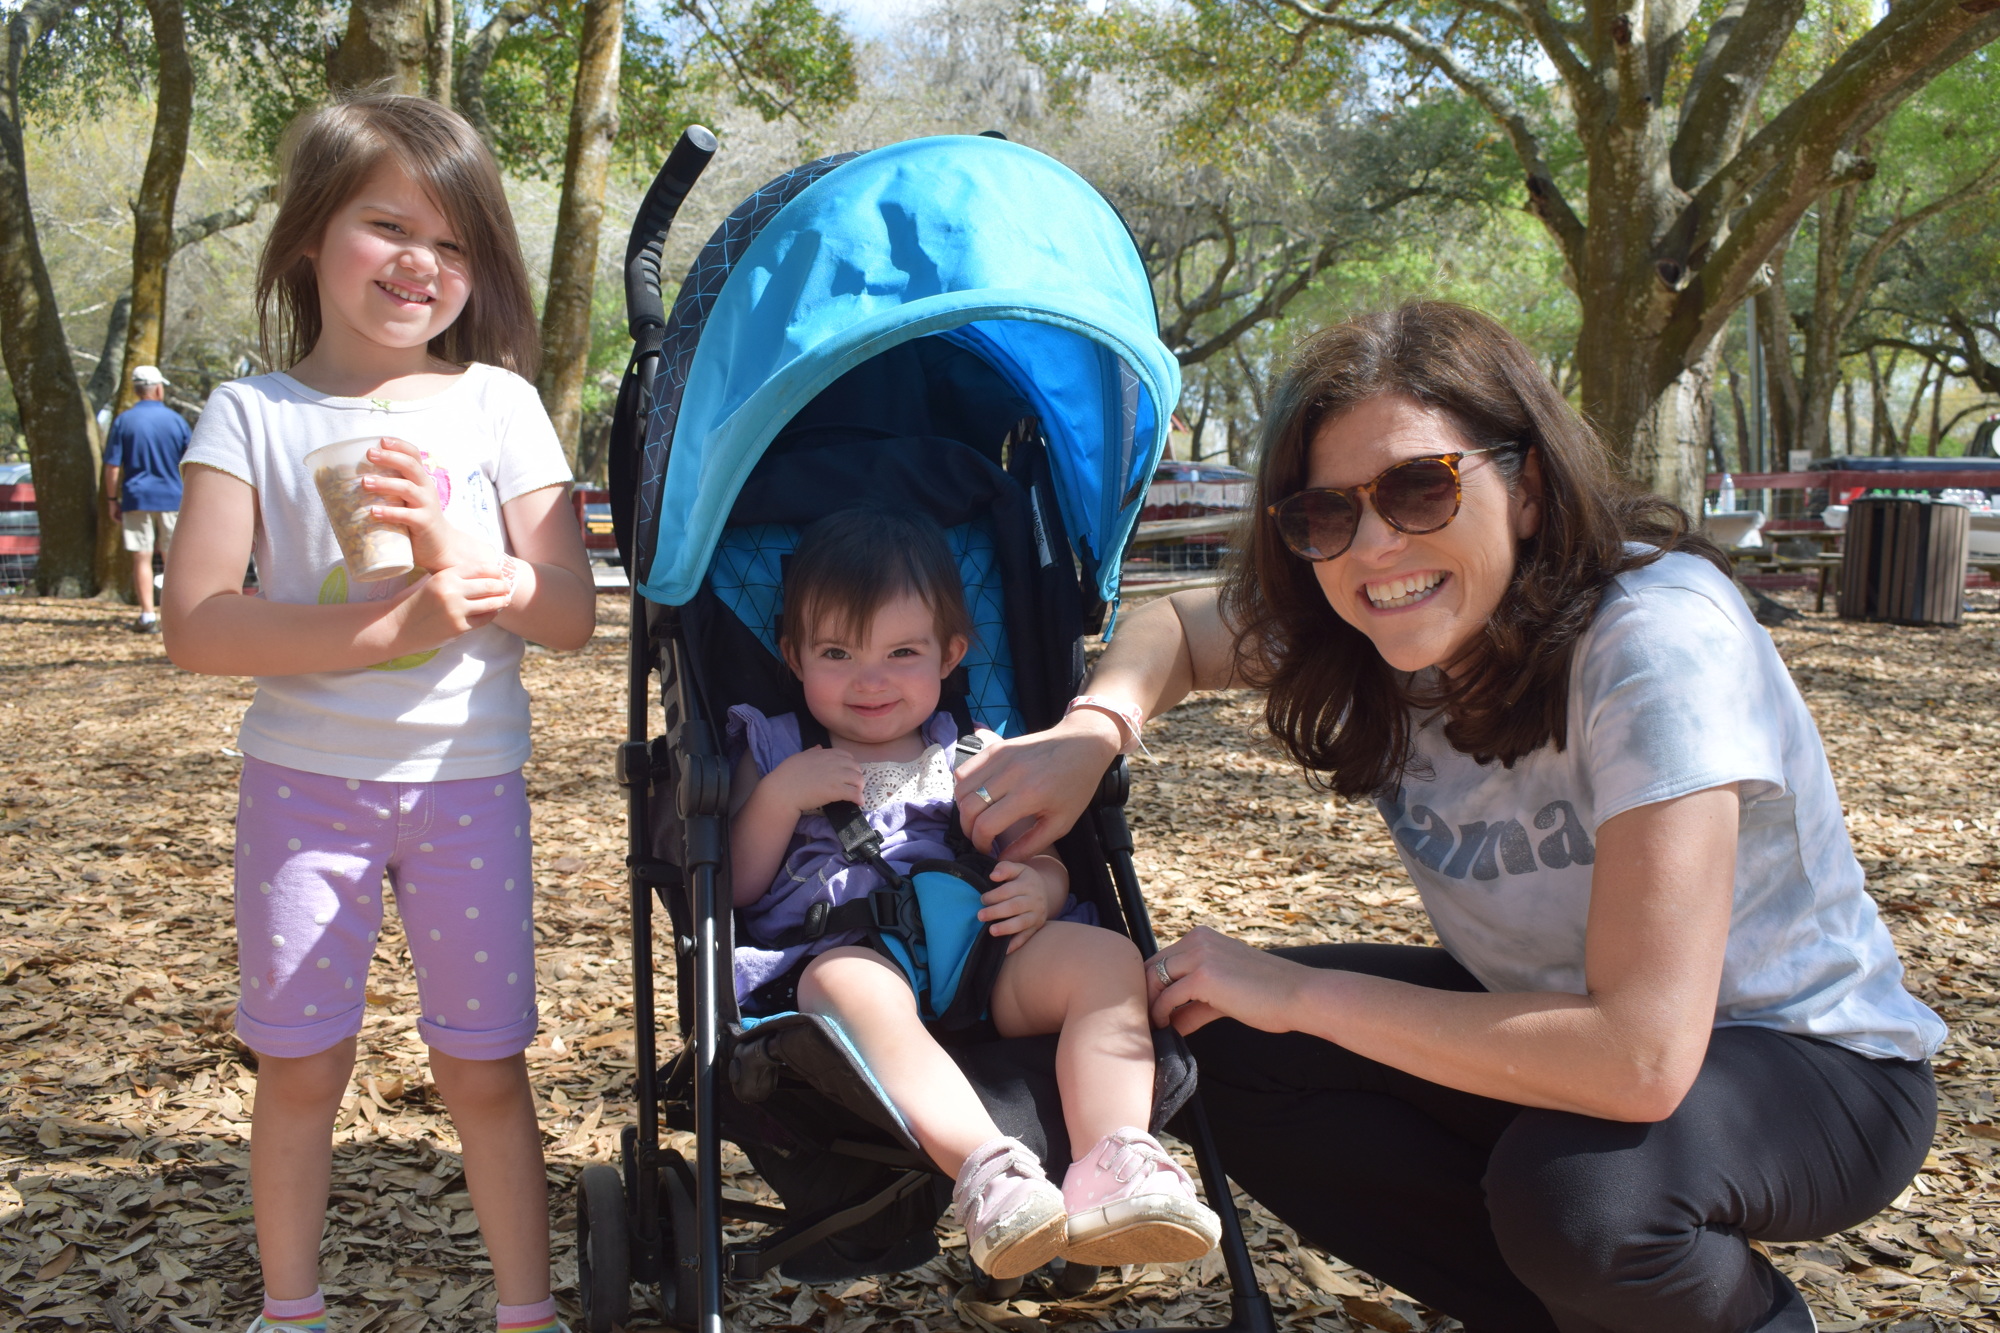 Sarasota's Charlotte Detwiler, who is 4, gets ready to feed animals with her 1-year-old sister, Emery Detwiler, and her mother, Laura Detwiler.